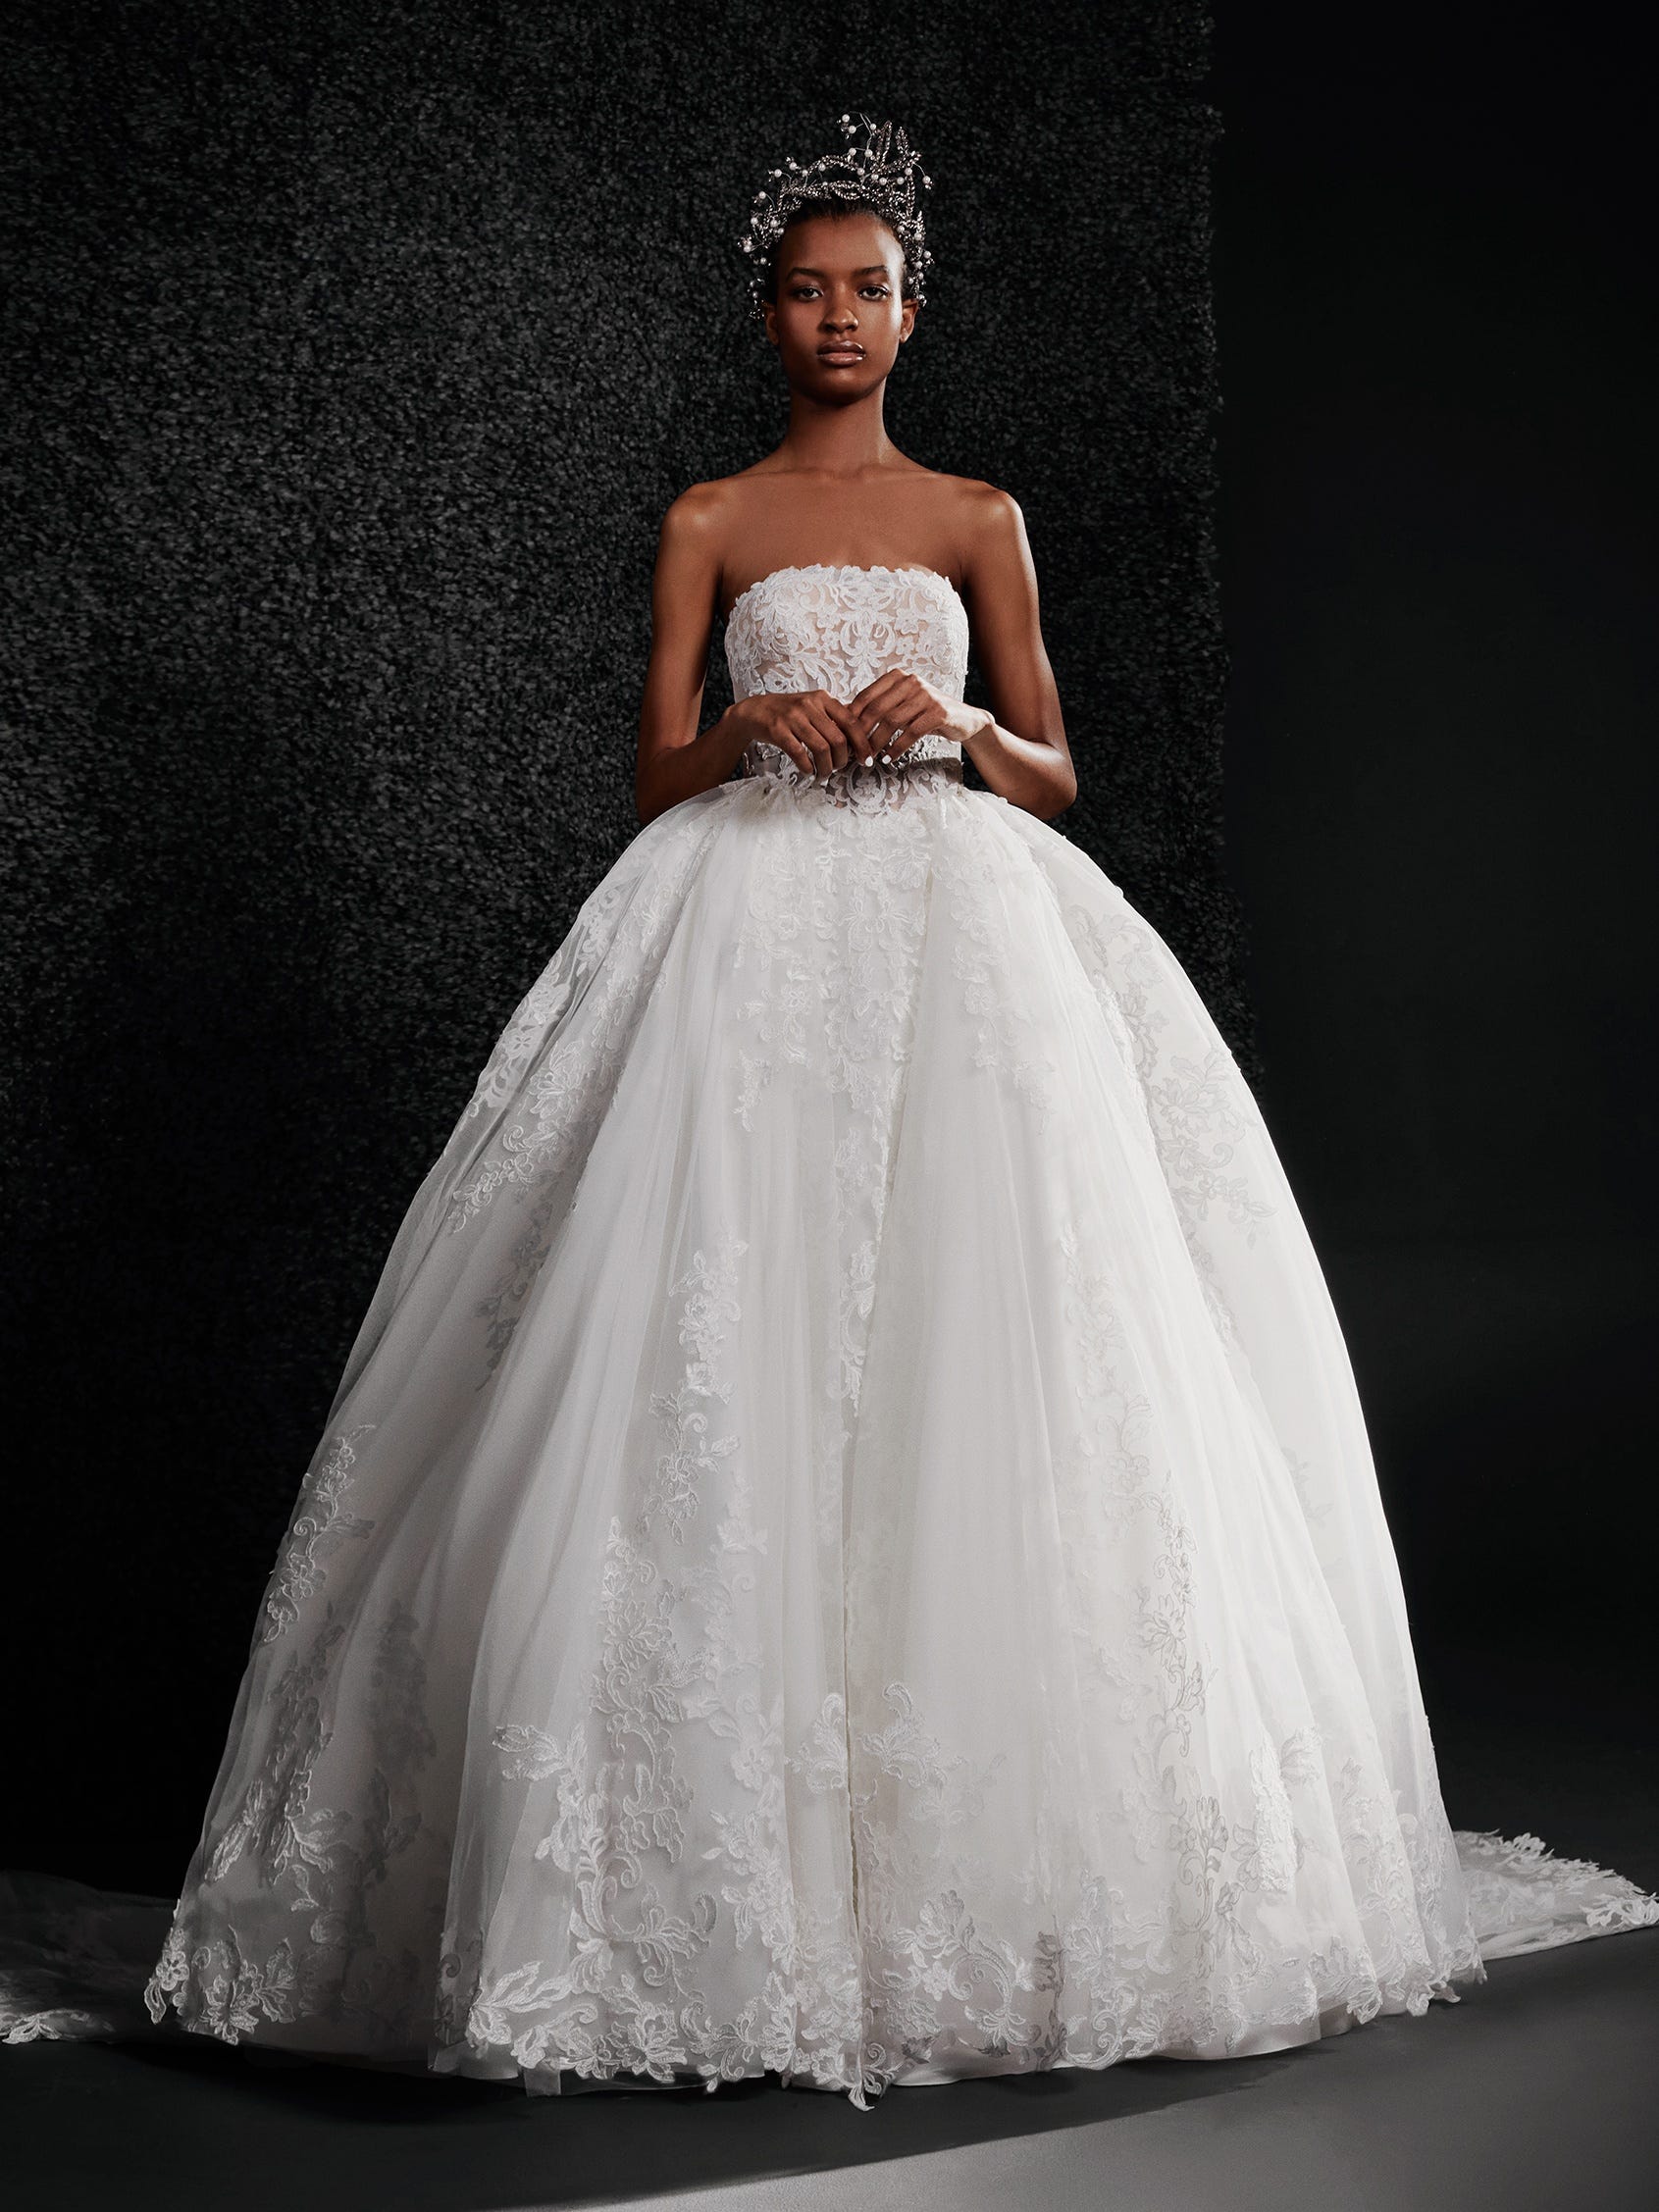 https://www.verawangbride.com/media/catalog/product/l/u/lucienne_b.jpg?quality=80&bg-color=255,255,255&fit=bounds&height=1023&width=767&canvas=767:1023